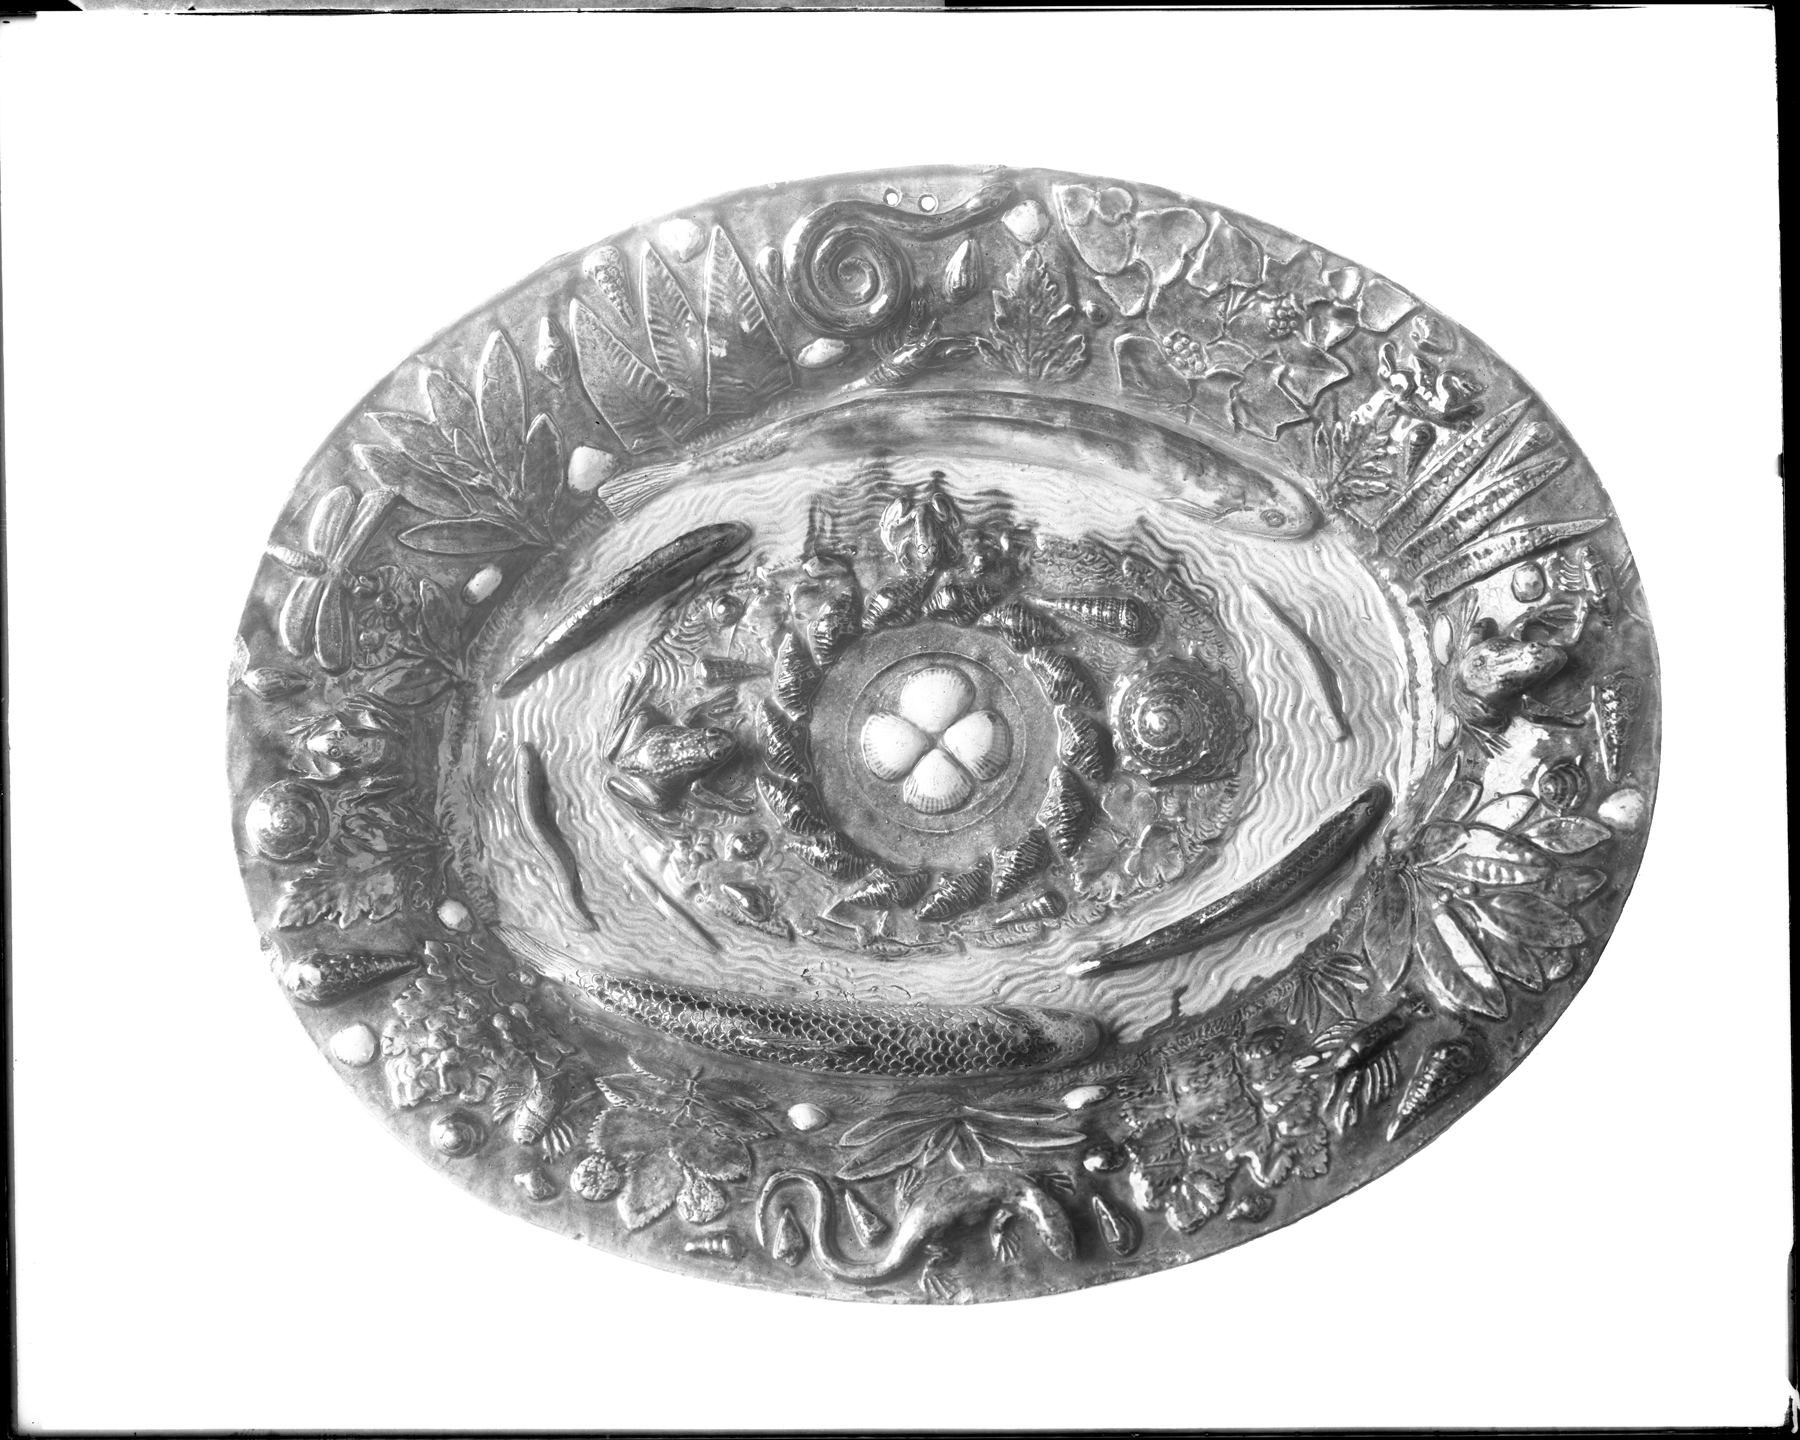 Image for Ornamental Platter with Pond Life